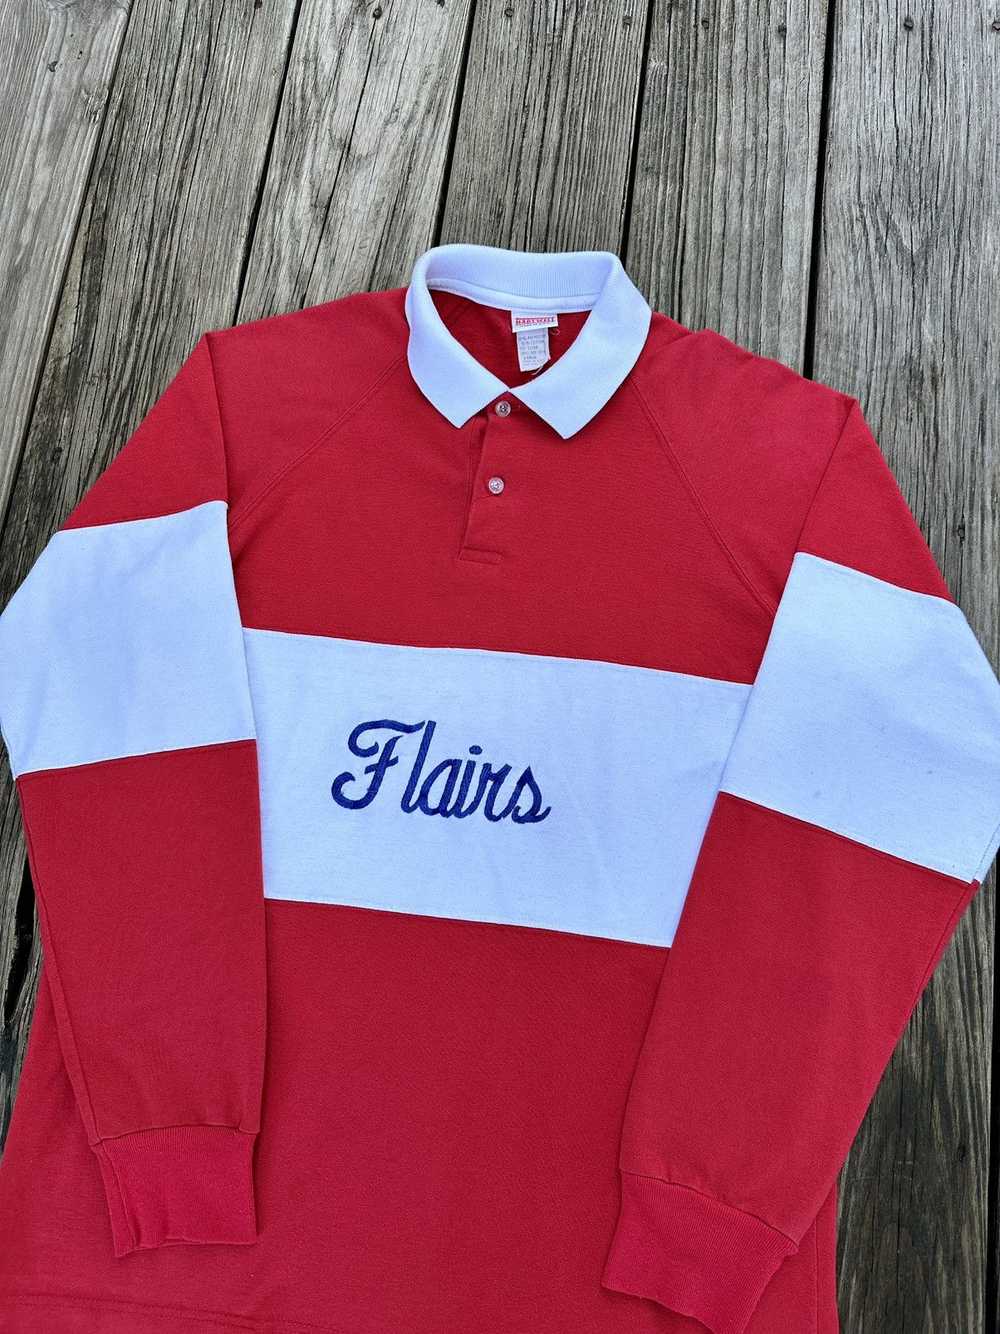 Vintage Vintage 1980's Rugby Polo Shirt - image 3